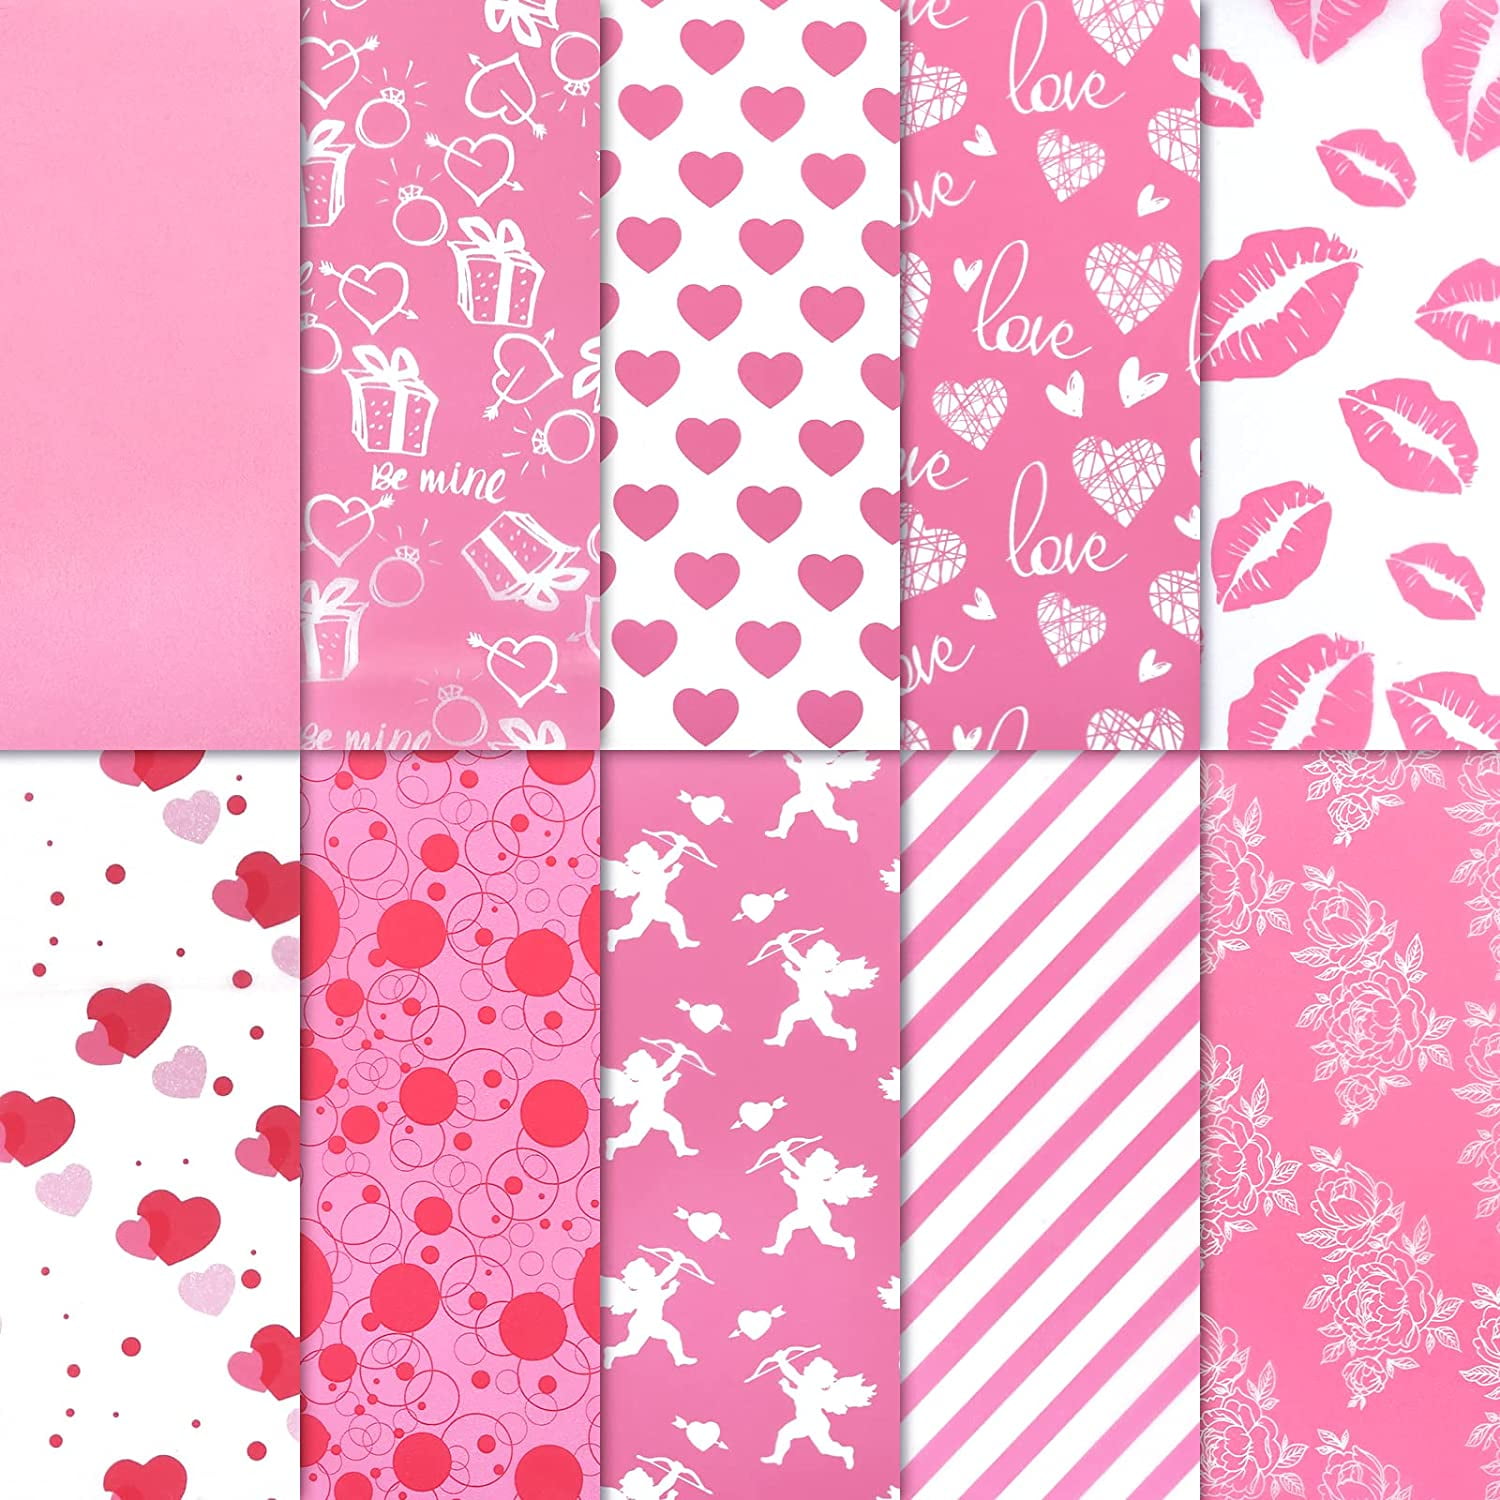 Kavoc 60 Sheets Huge Size Valentines Day Tissue Bulk, 20 x 30 inch Hot Pink  Rose Red Love Heart Cupid Tissue Paper for Gift Wrapping, Gift Bags